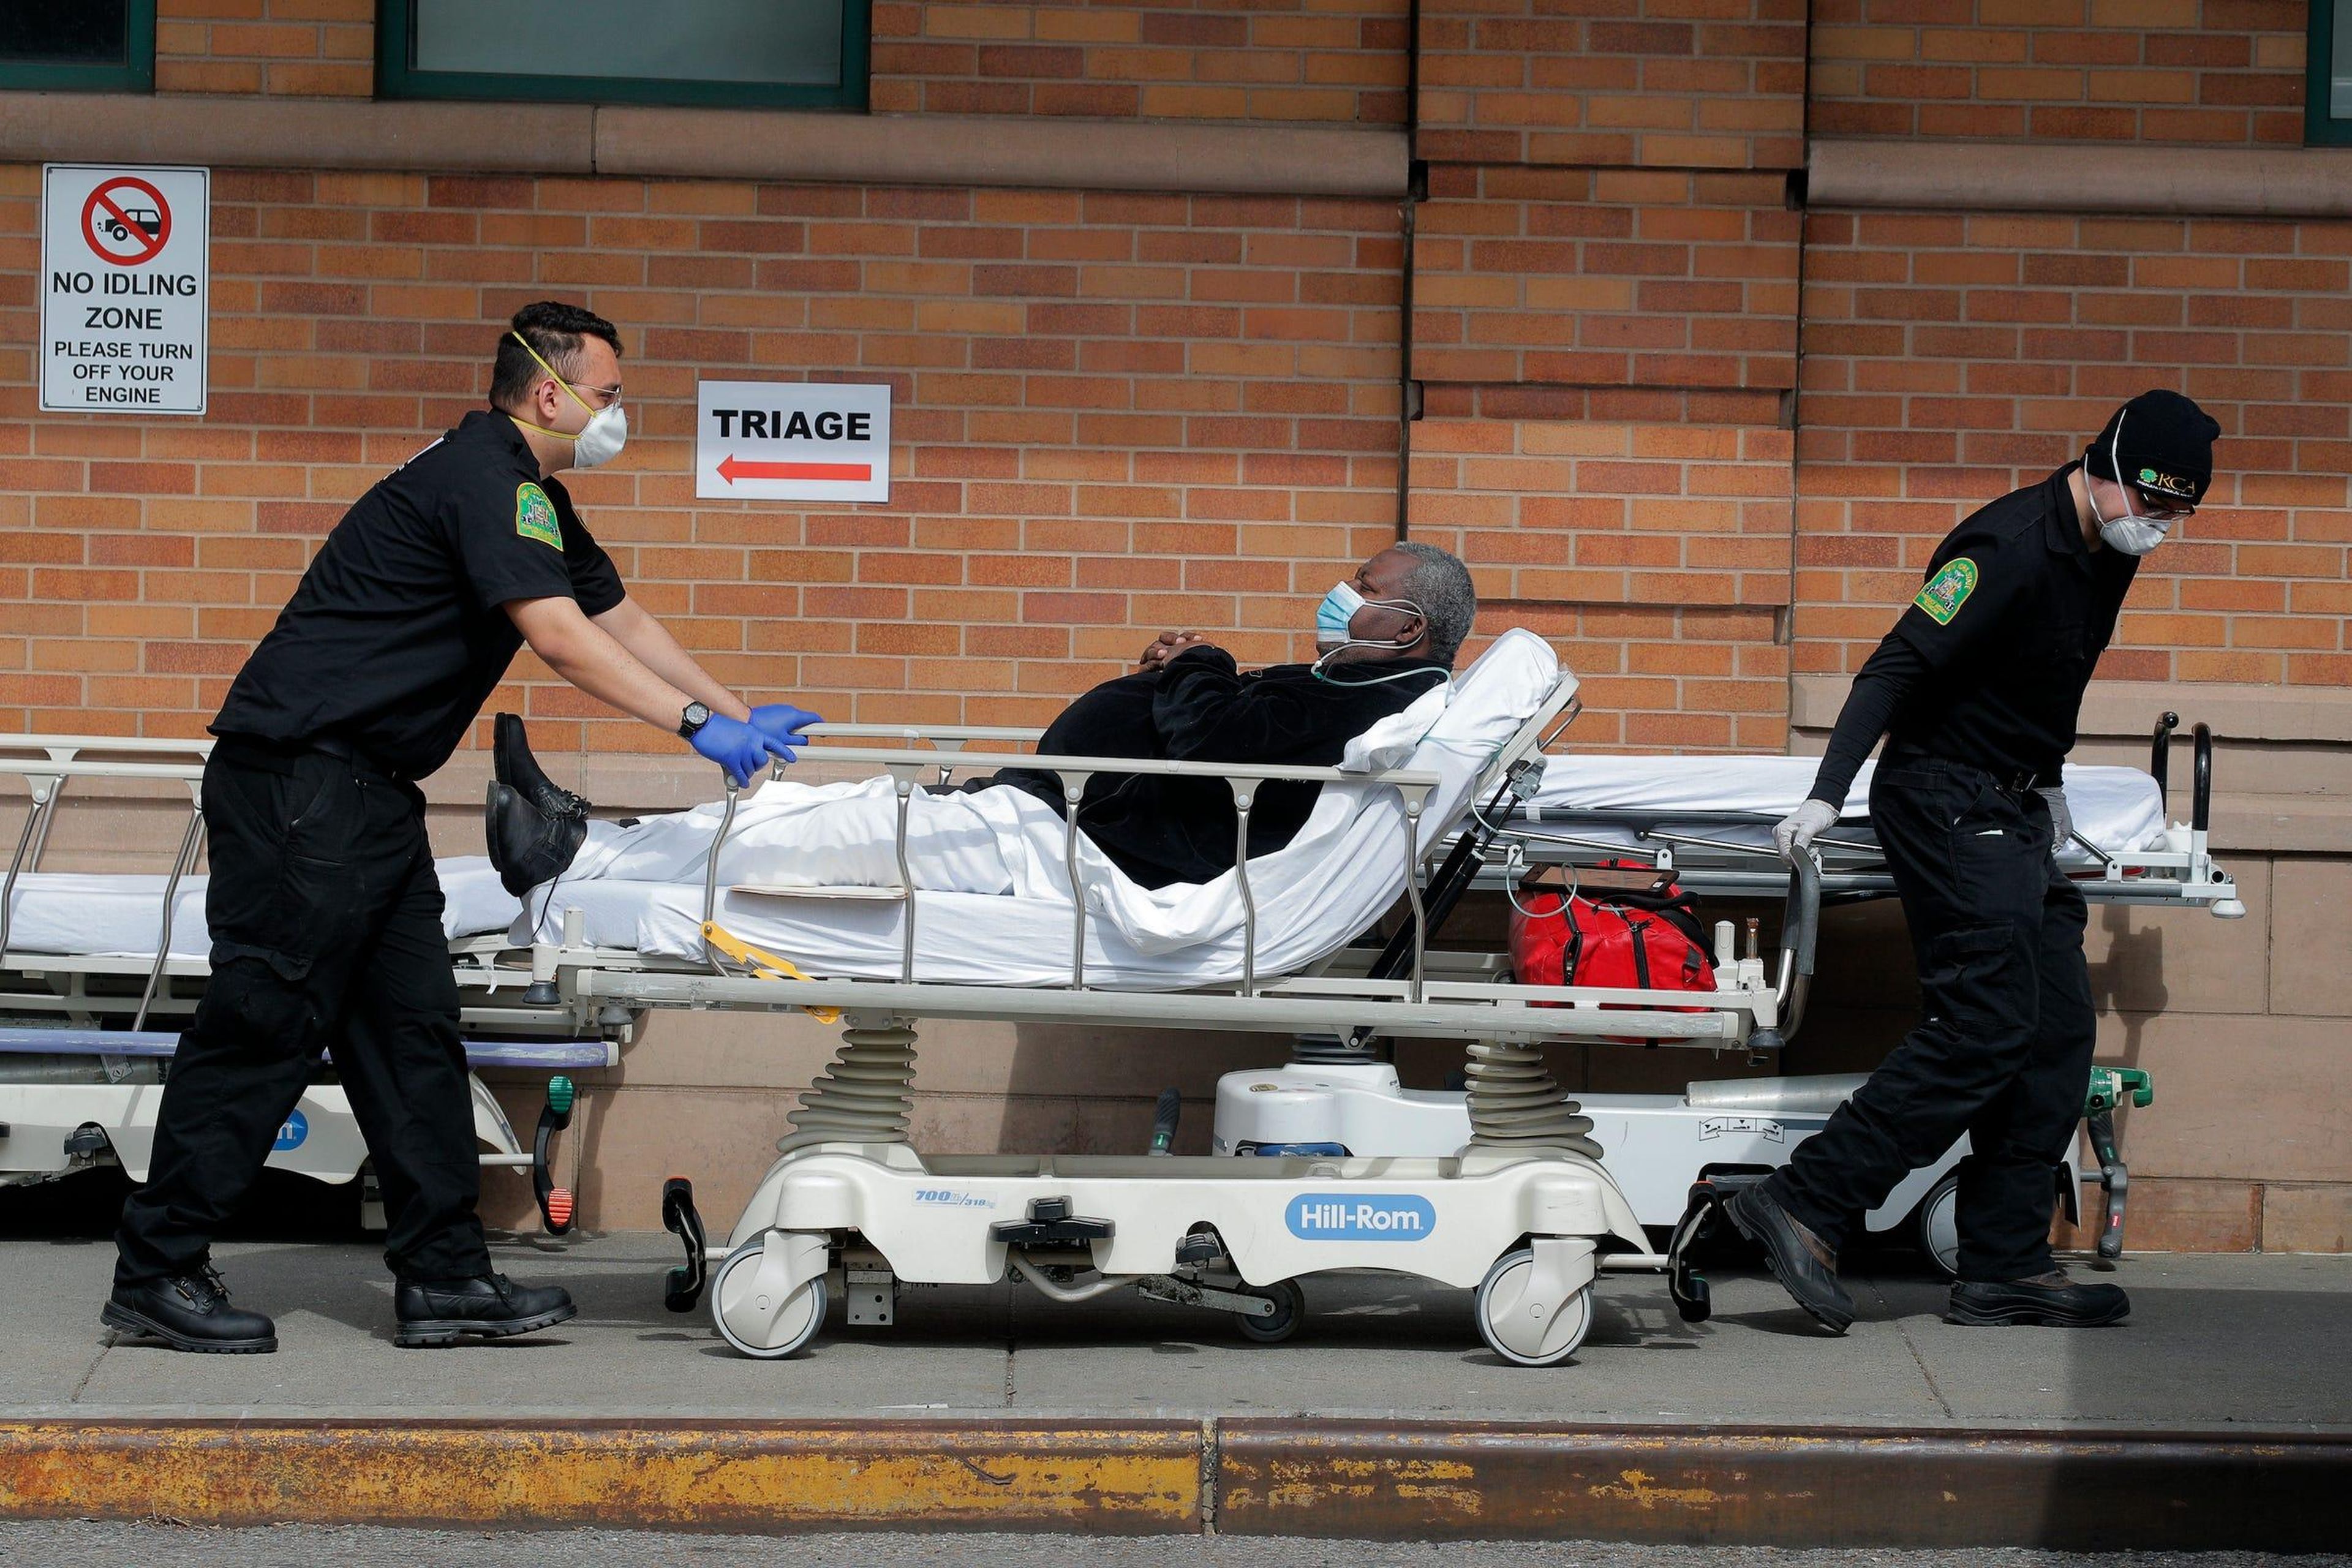 Paramedics take a patient to a Brooklyn emergency room during the coronavirus outbreak in New York on April 7, 2020. Brendan Mcdermid/Reuters